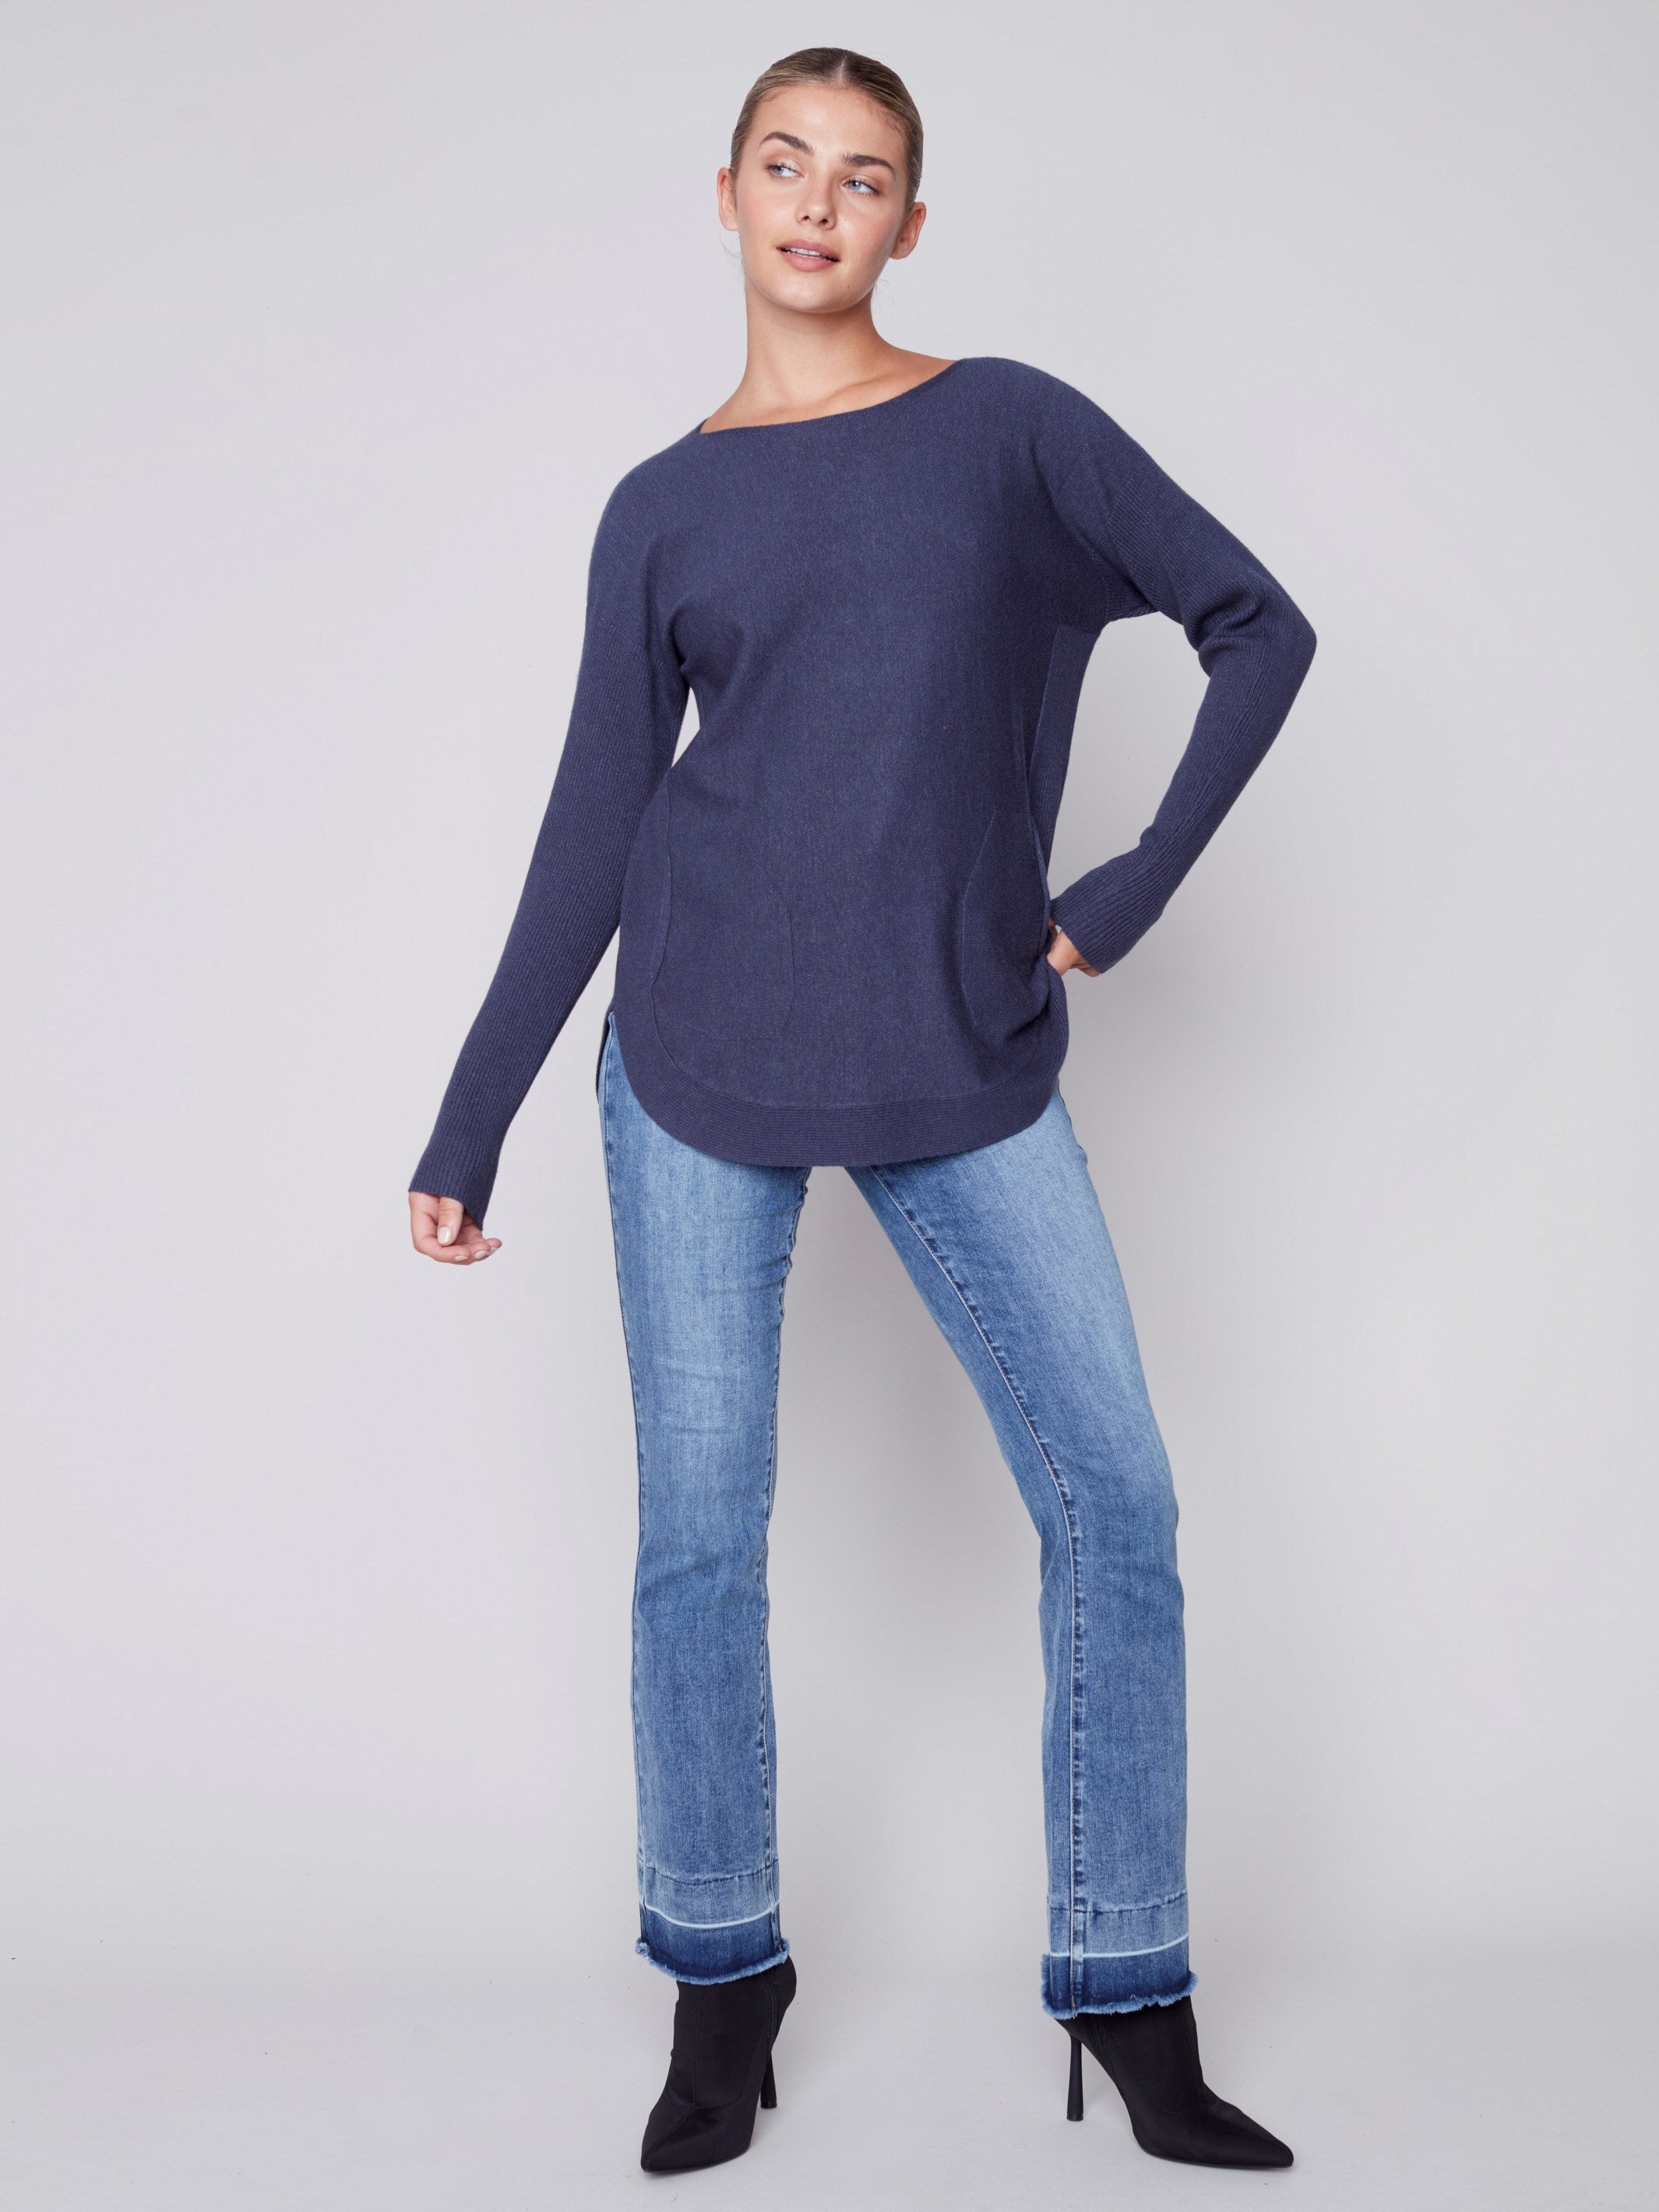 Knit Sweater with Back Lace-up Detail - Denim